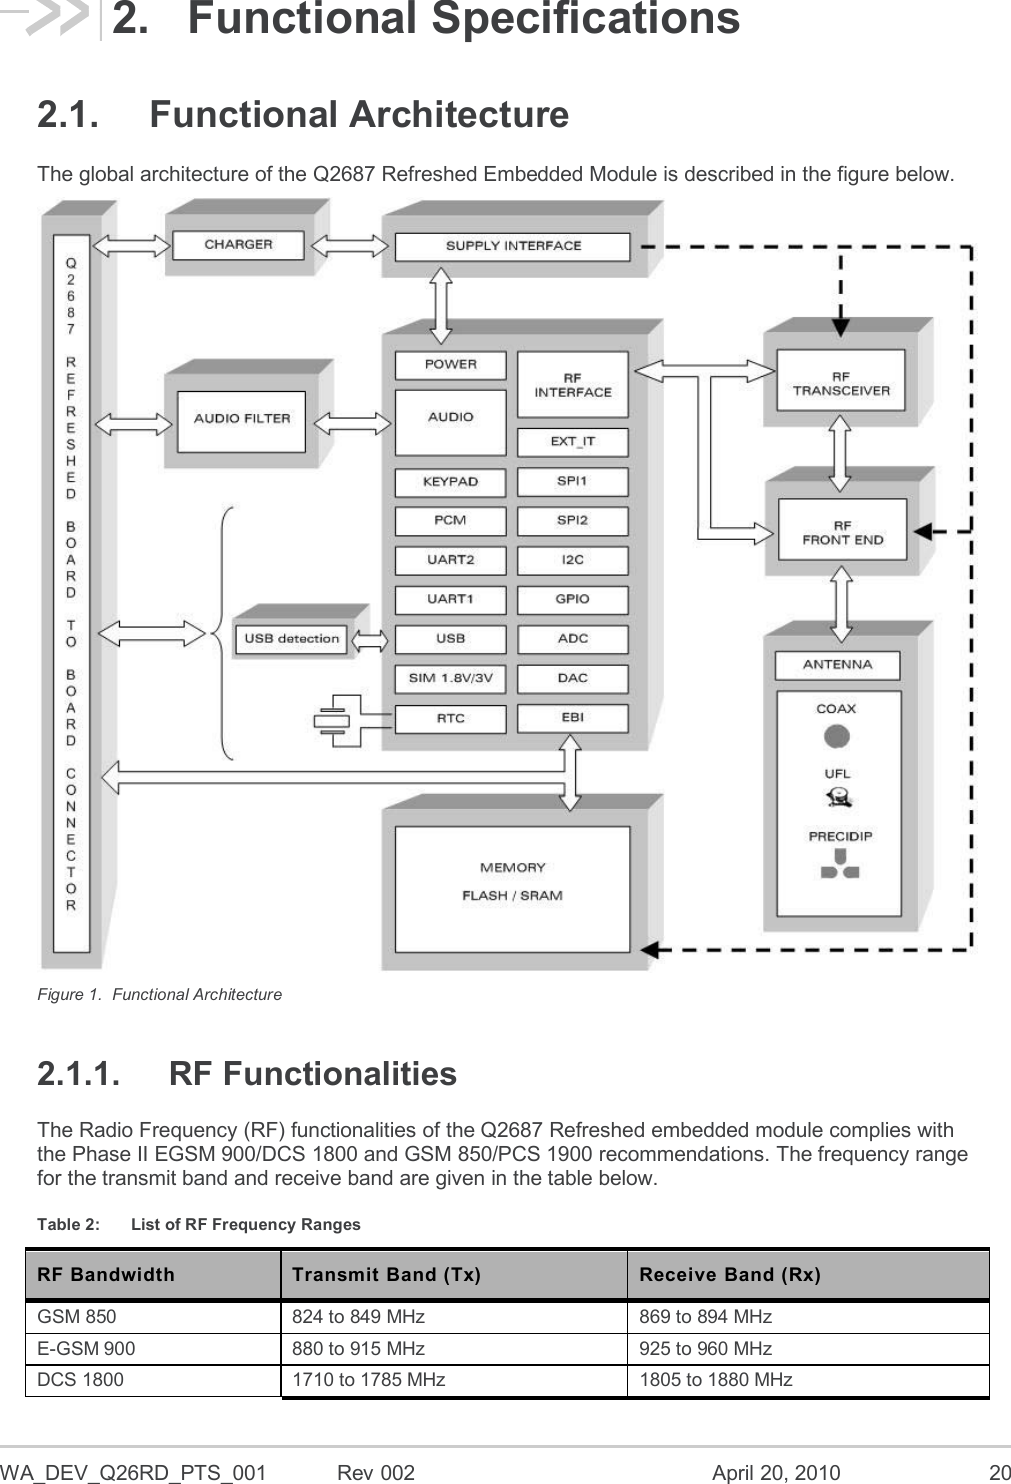  WA_DEV_Q26RD_PTS_001  Rev 002  April 20, 2010 20 2.  Functional Specifications 2.1.  Functional Architecture The global architecture of the Q2687 Refreshed Embedded Module is described in the figure below.  Figure 1.  Functional Architecture 2.1.1.  RF Functionalities The Radio Frequency (RF) functionalities of the Q2687 Refreshed embedded module complies with the Phase II EGSM 900/DCS 1800 and GSM 850/PCS 1900 recommendations. The frequency range for the transmit band and receive band are given in the table below. Table 2:  List of RF Frequency Ranges RF Bandwidth Transmit Band (Tx) Receive Band (Rx) GSM 850 824 to 849 MHz 869 to 894 MHz E-GSM 900 880 to 915 MHz 925 to 960 MHz DCS 1800 1710 to 1785 MHz 1805 to 1880 MHz 